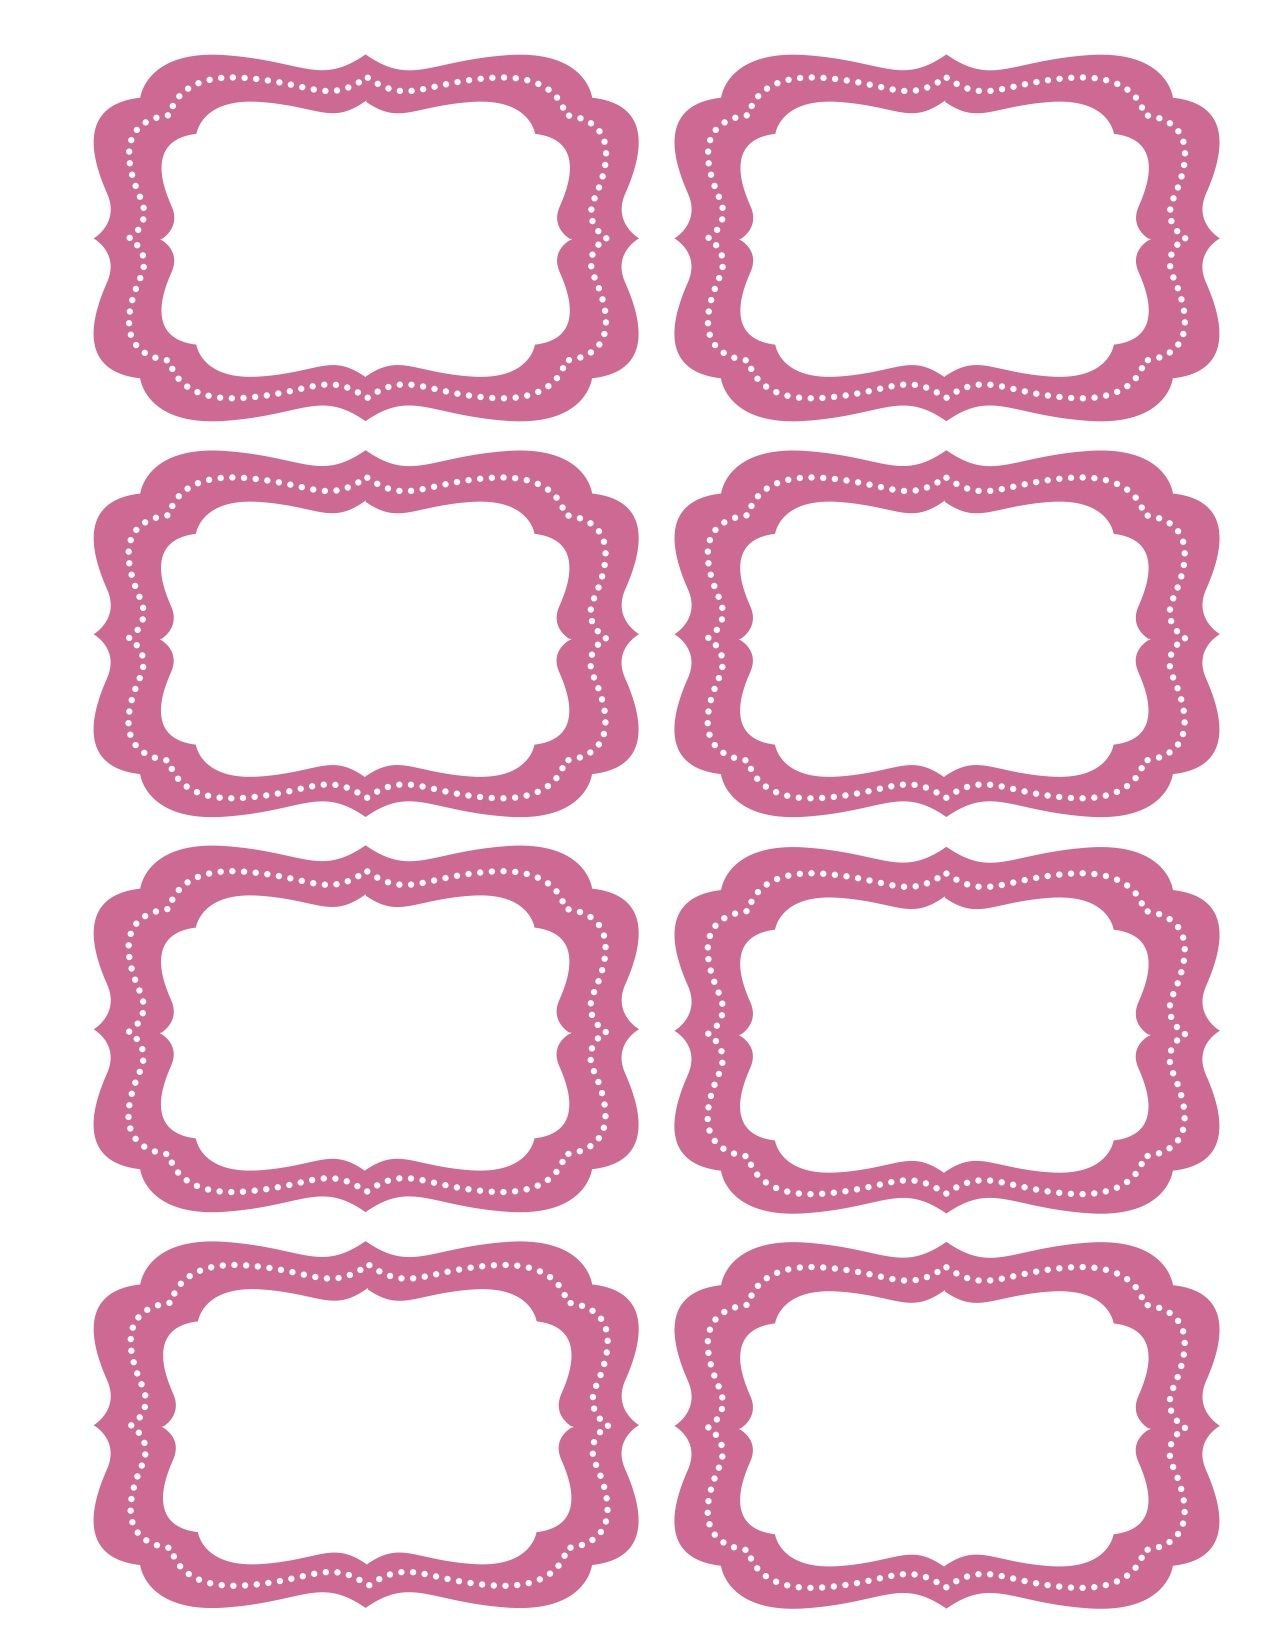 Free Printable Bag Label Templates  Candy Labels Blank Image in Free Label Templates Online